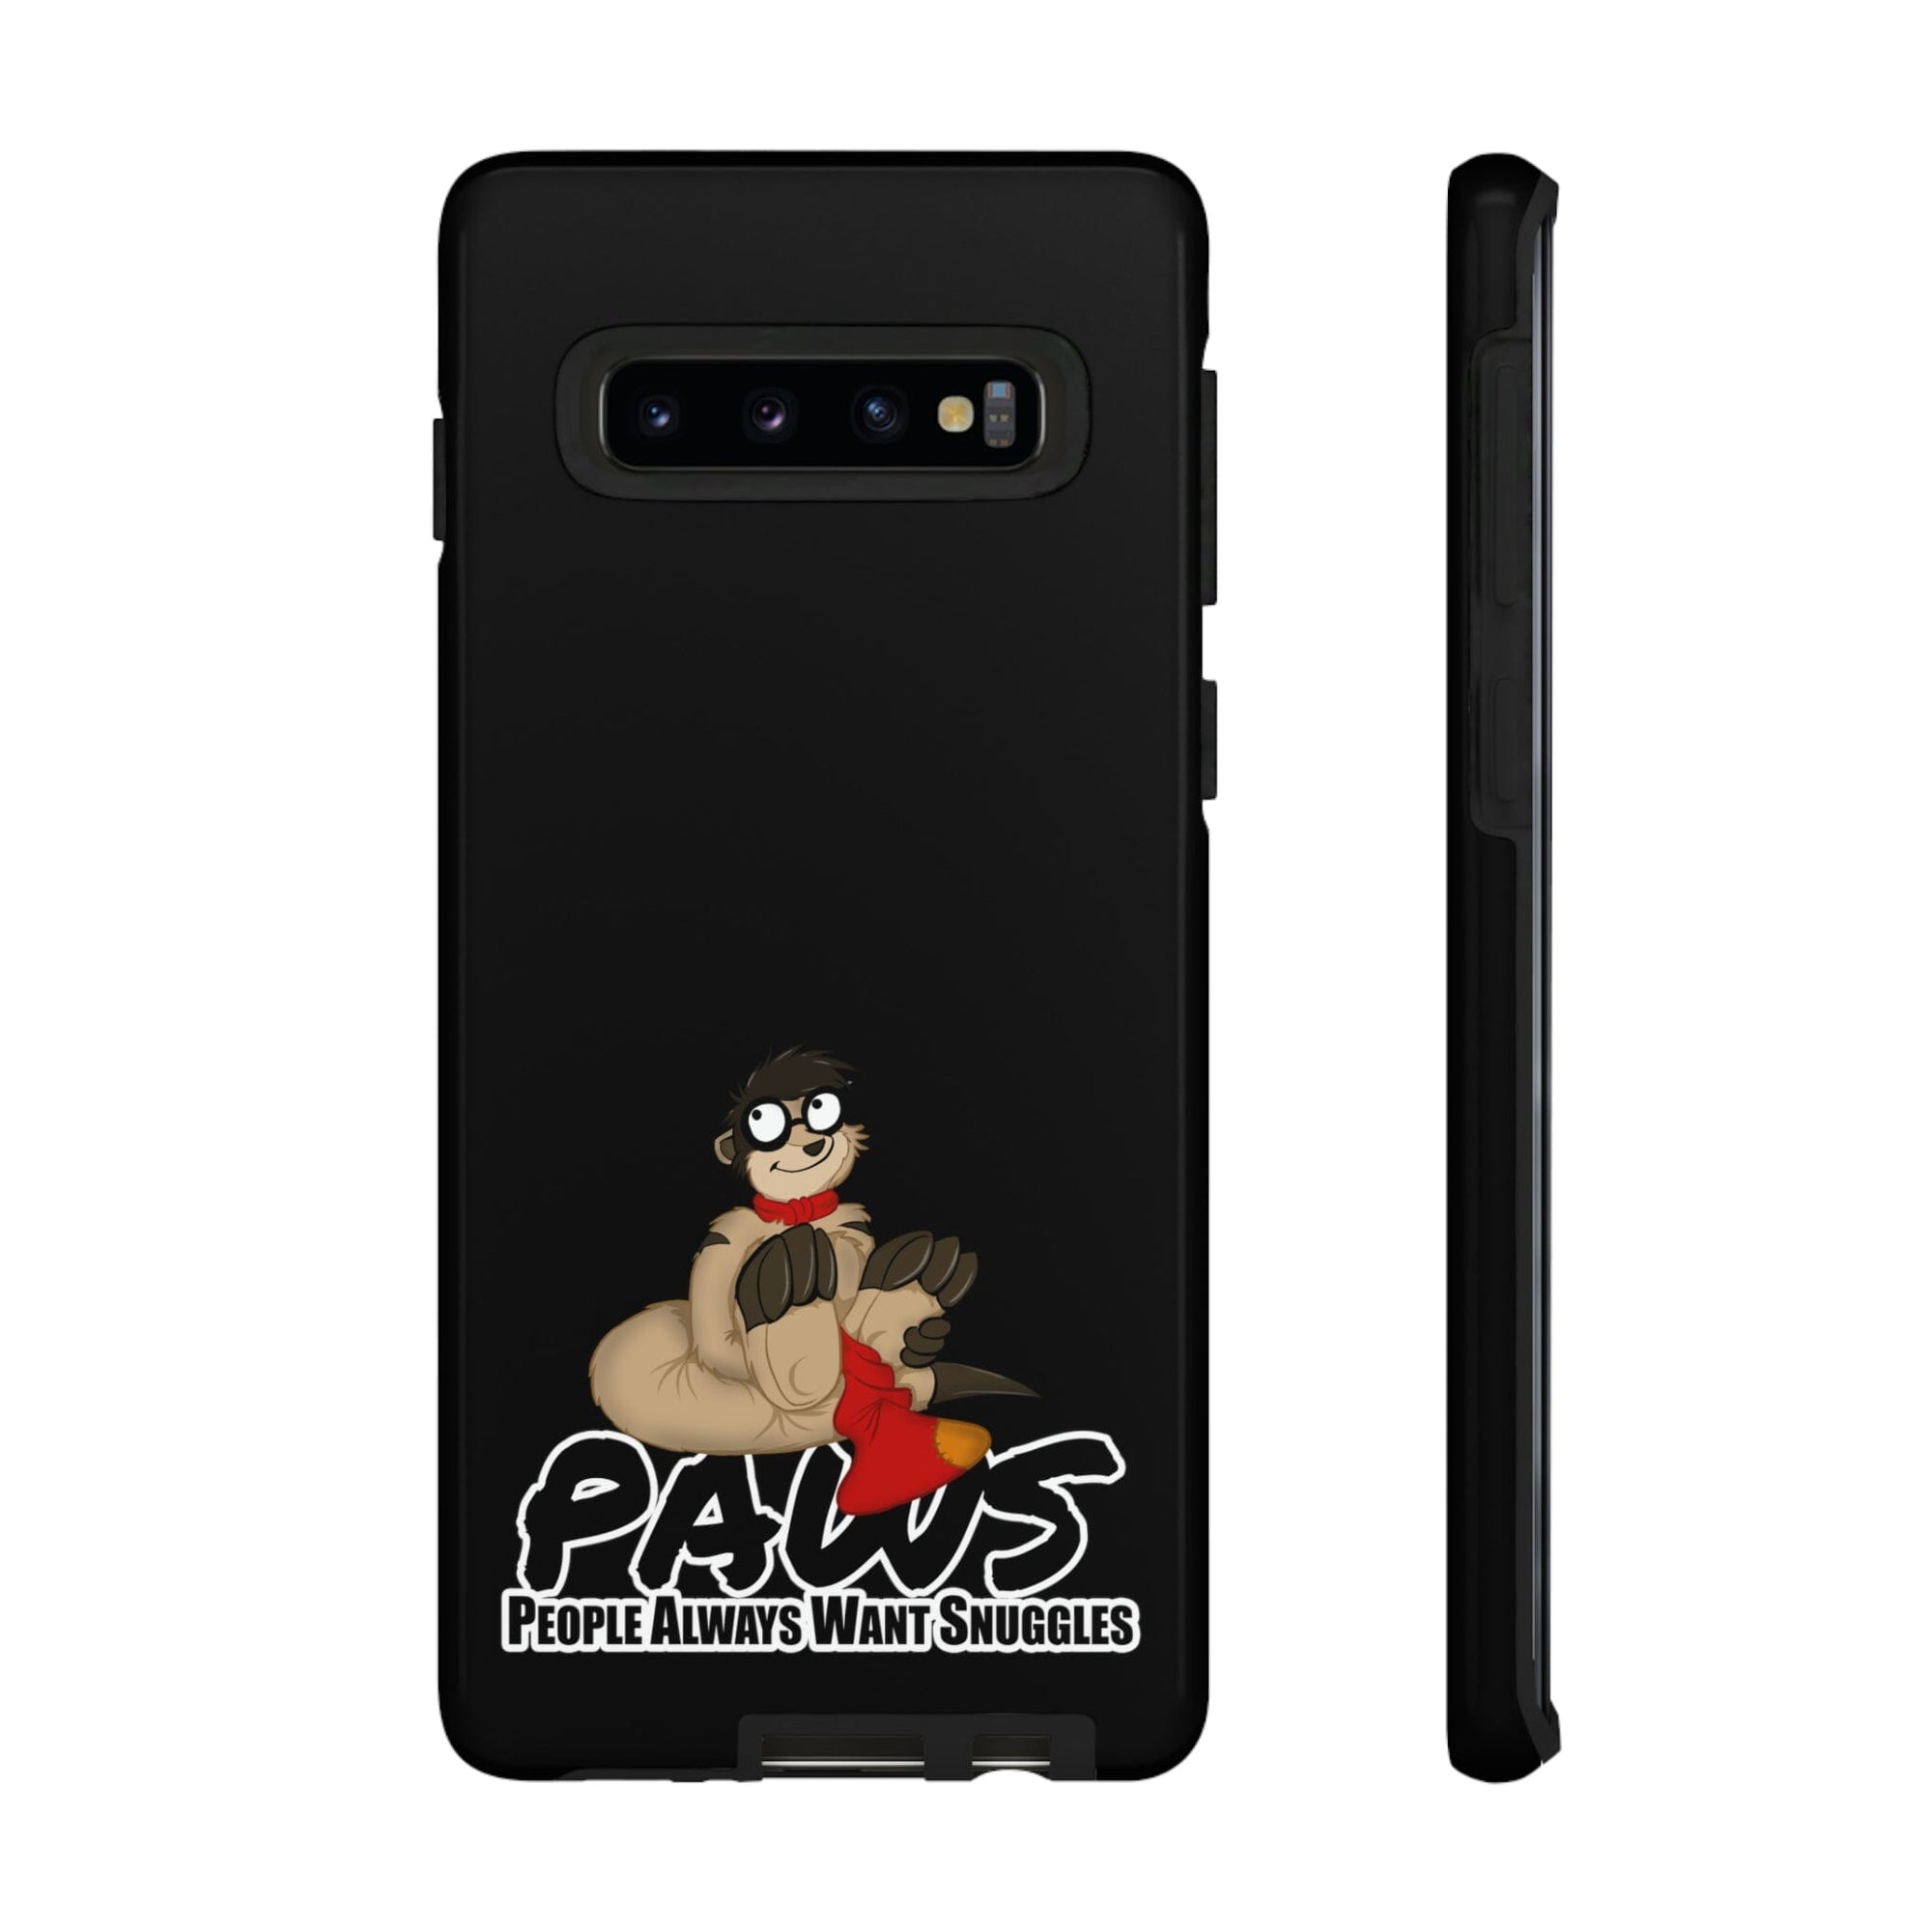 Thabo Meerkat - PAWS - Phone Case Phone Case Thabo Meerkat Glossy Samsung Galaxy S10 